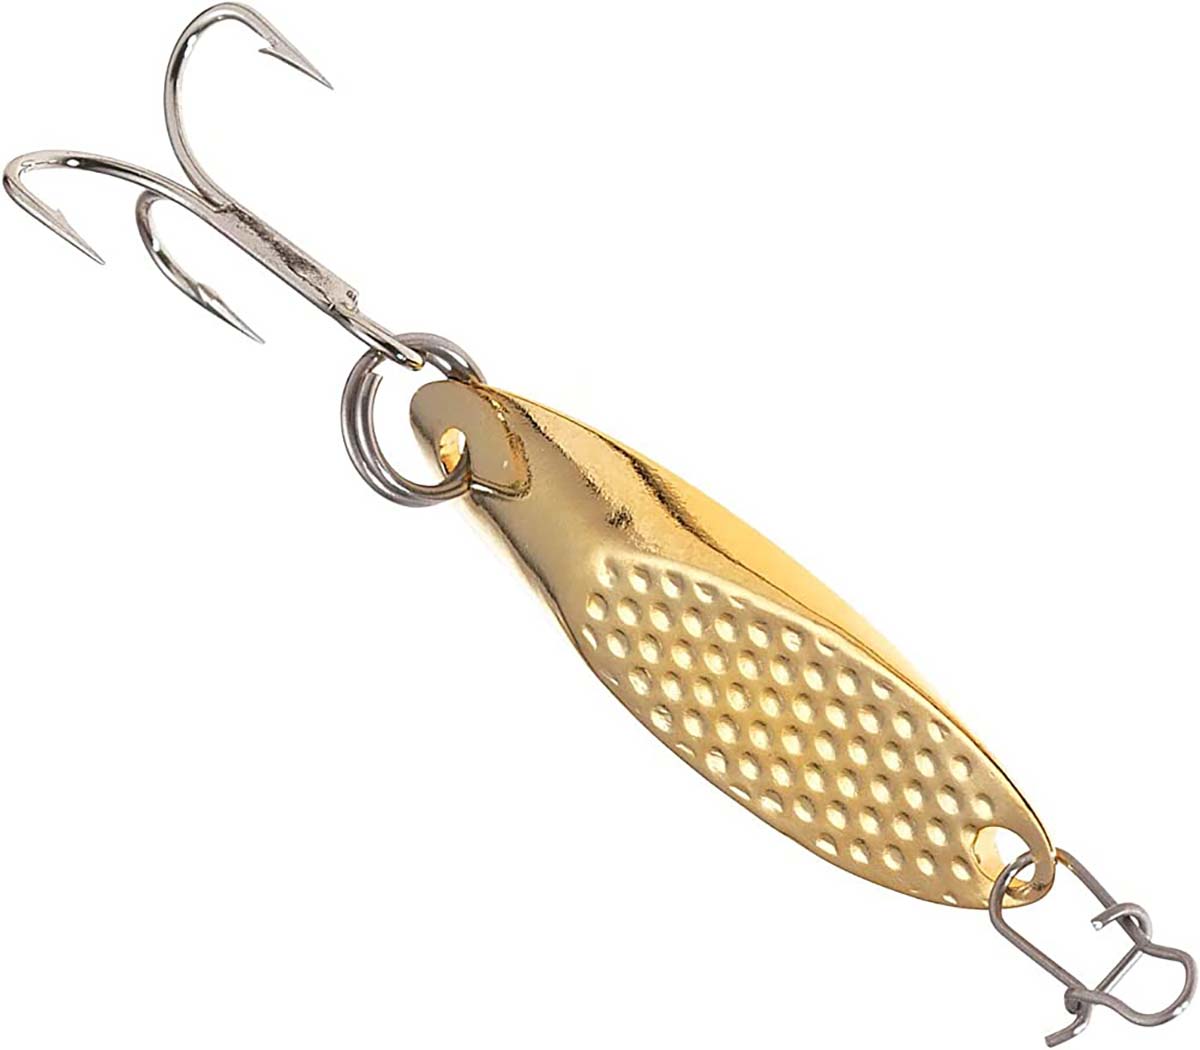 Here are my dozen must-have lures and baits for first day of trout